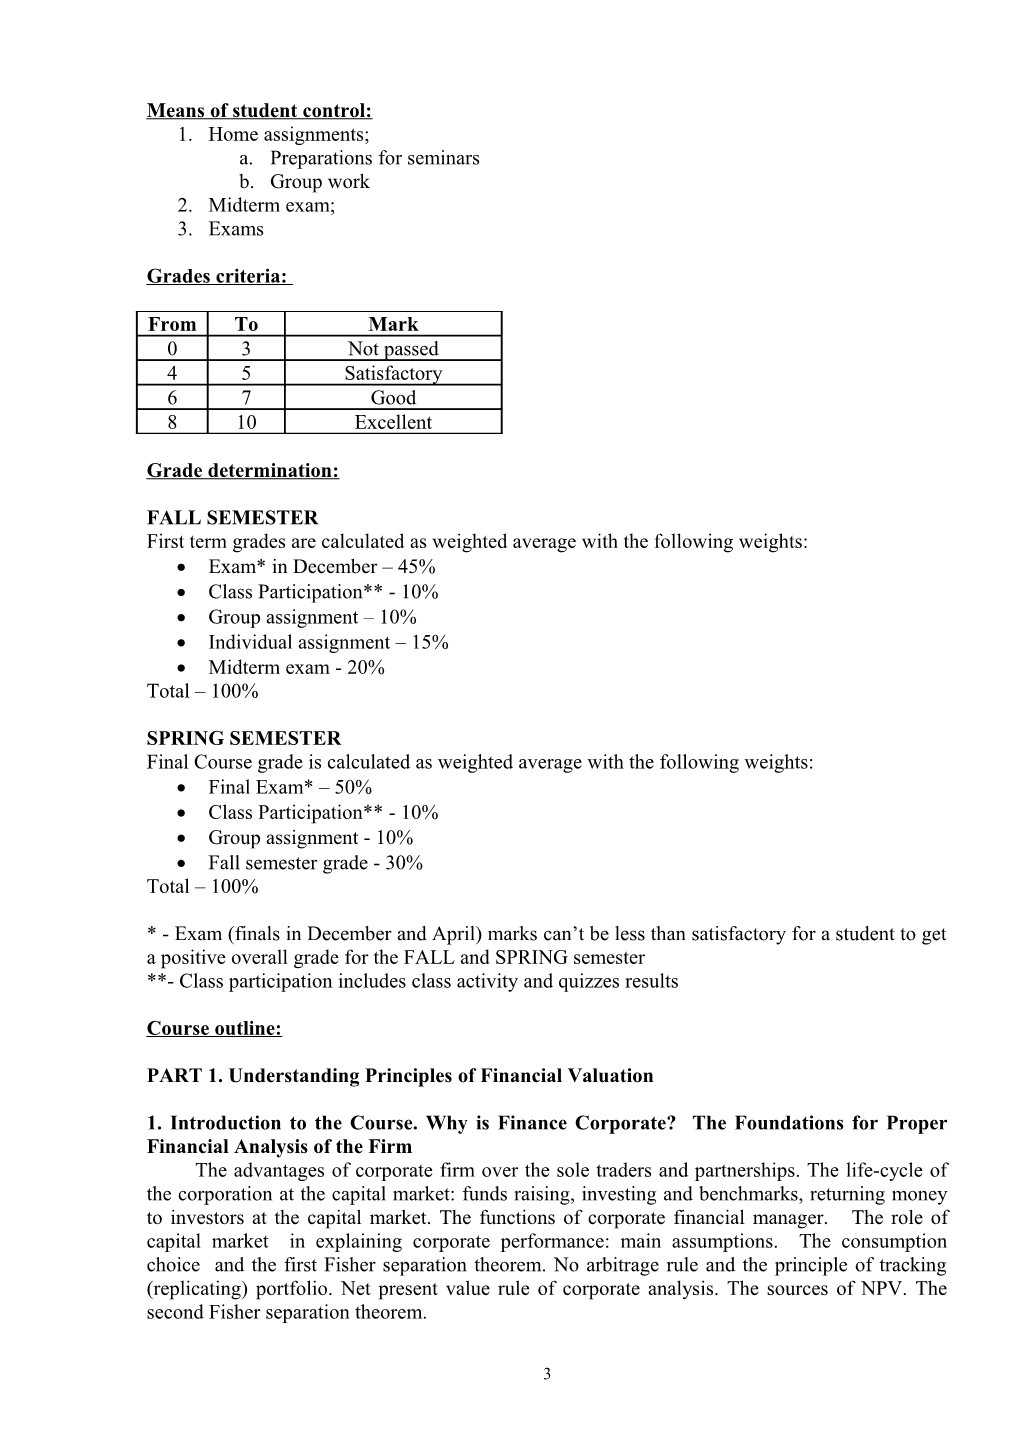 Syllabus for CORPORATE FINANCE